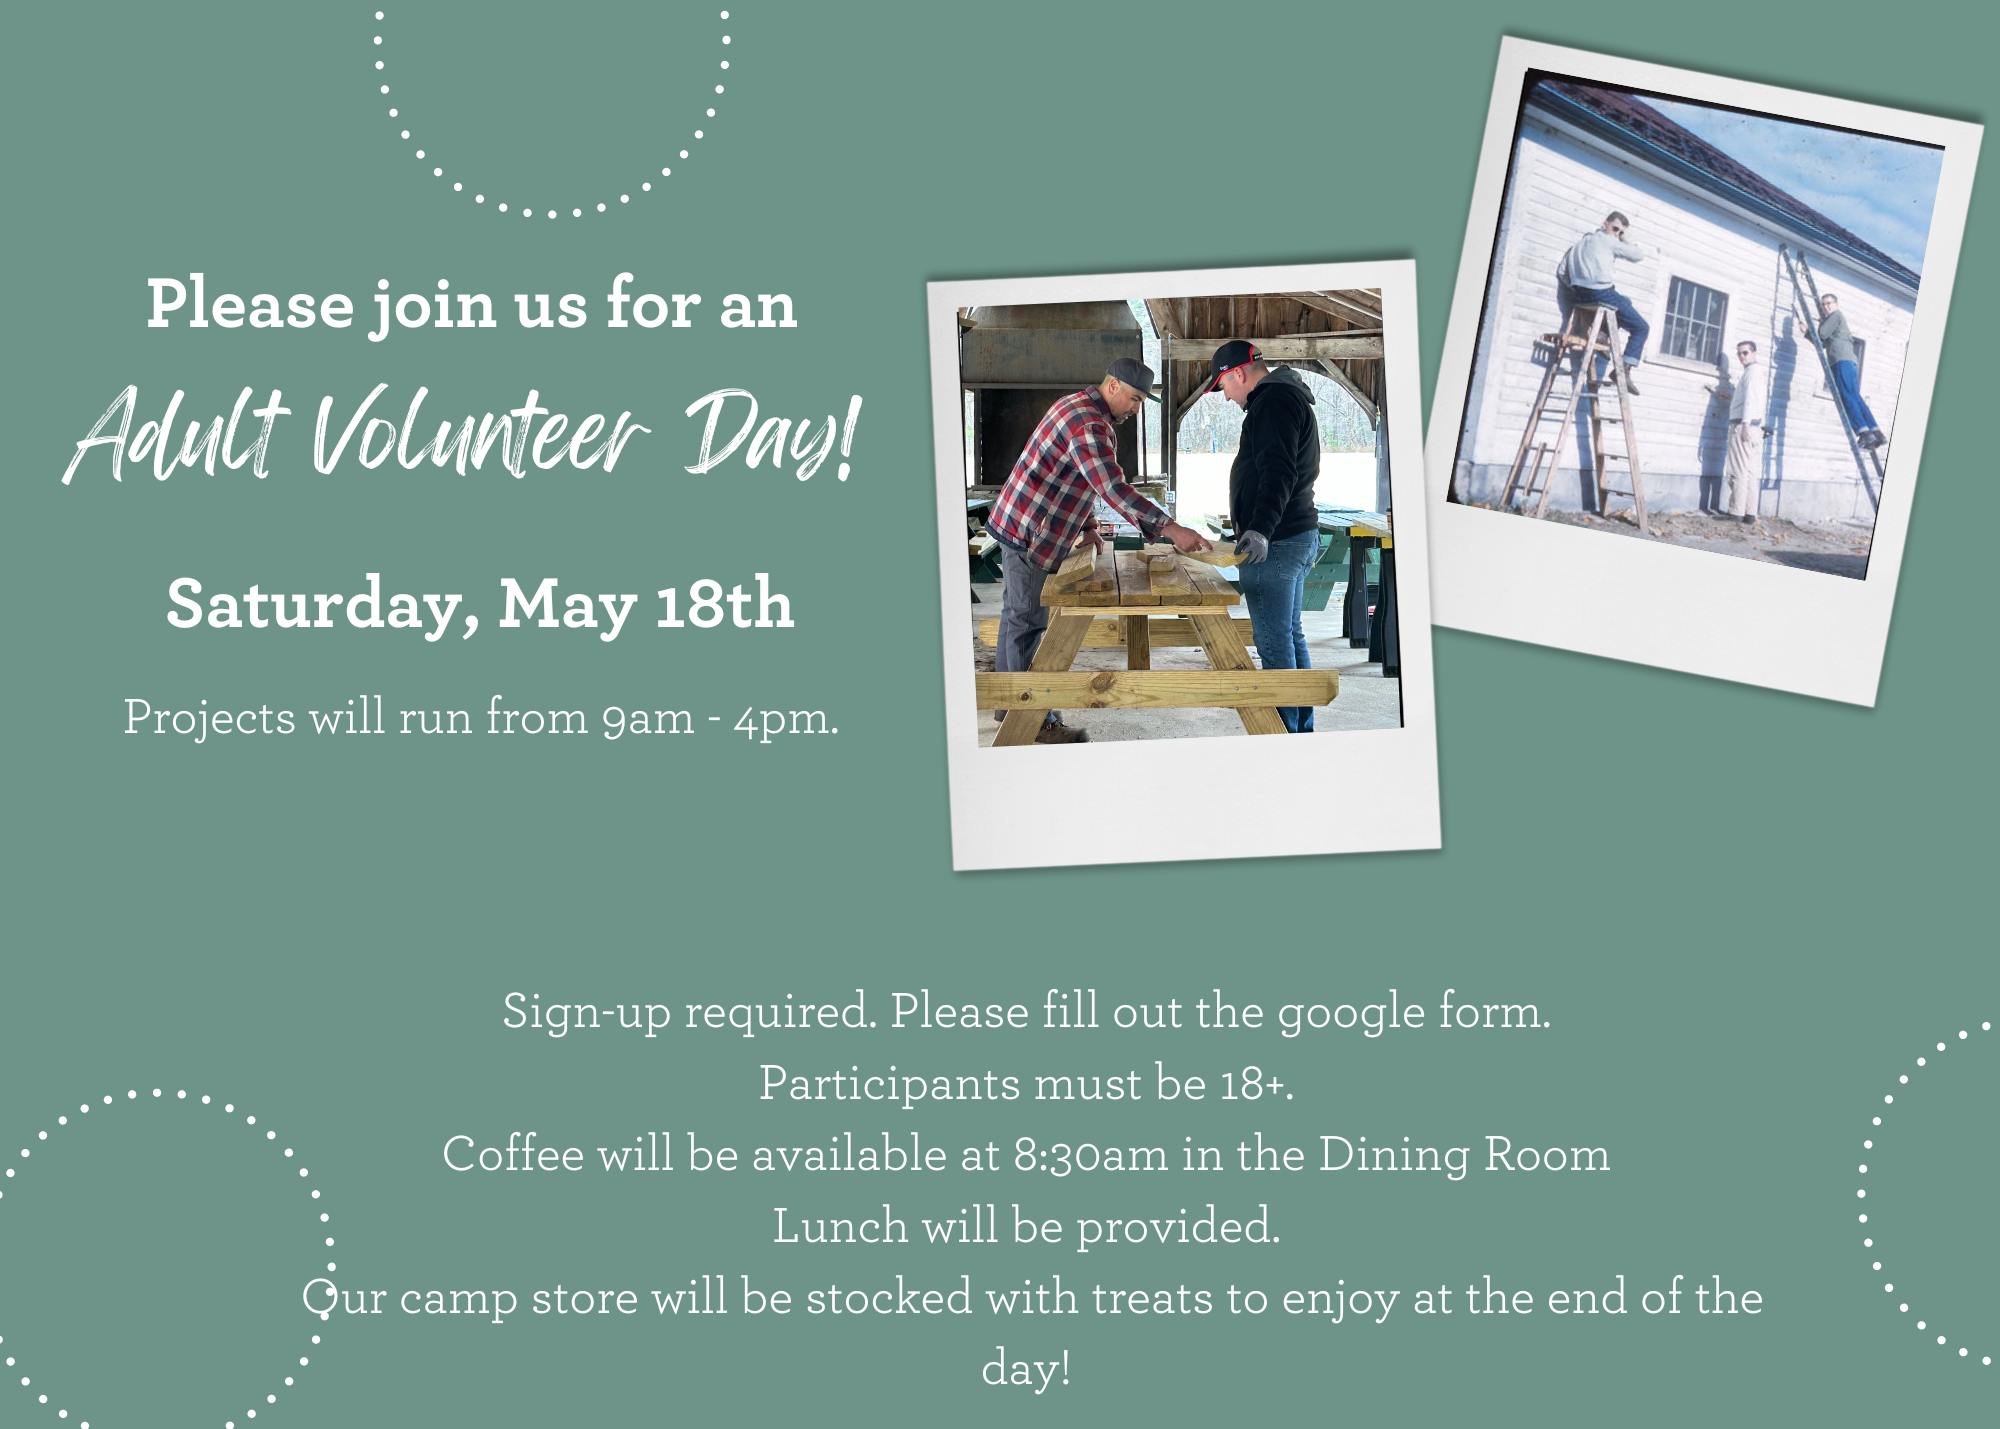 Don't forget next Saturday May 18th we are hosting a volunteer day to get ready for summer! 

Registere here: https://forms.gle/KFxfLrvrCBduisys6